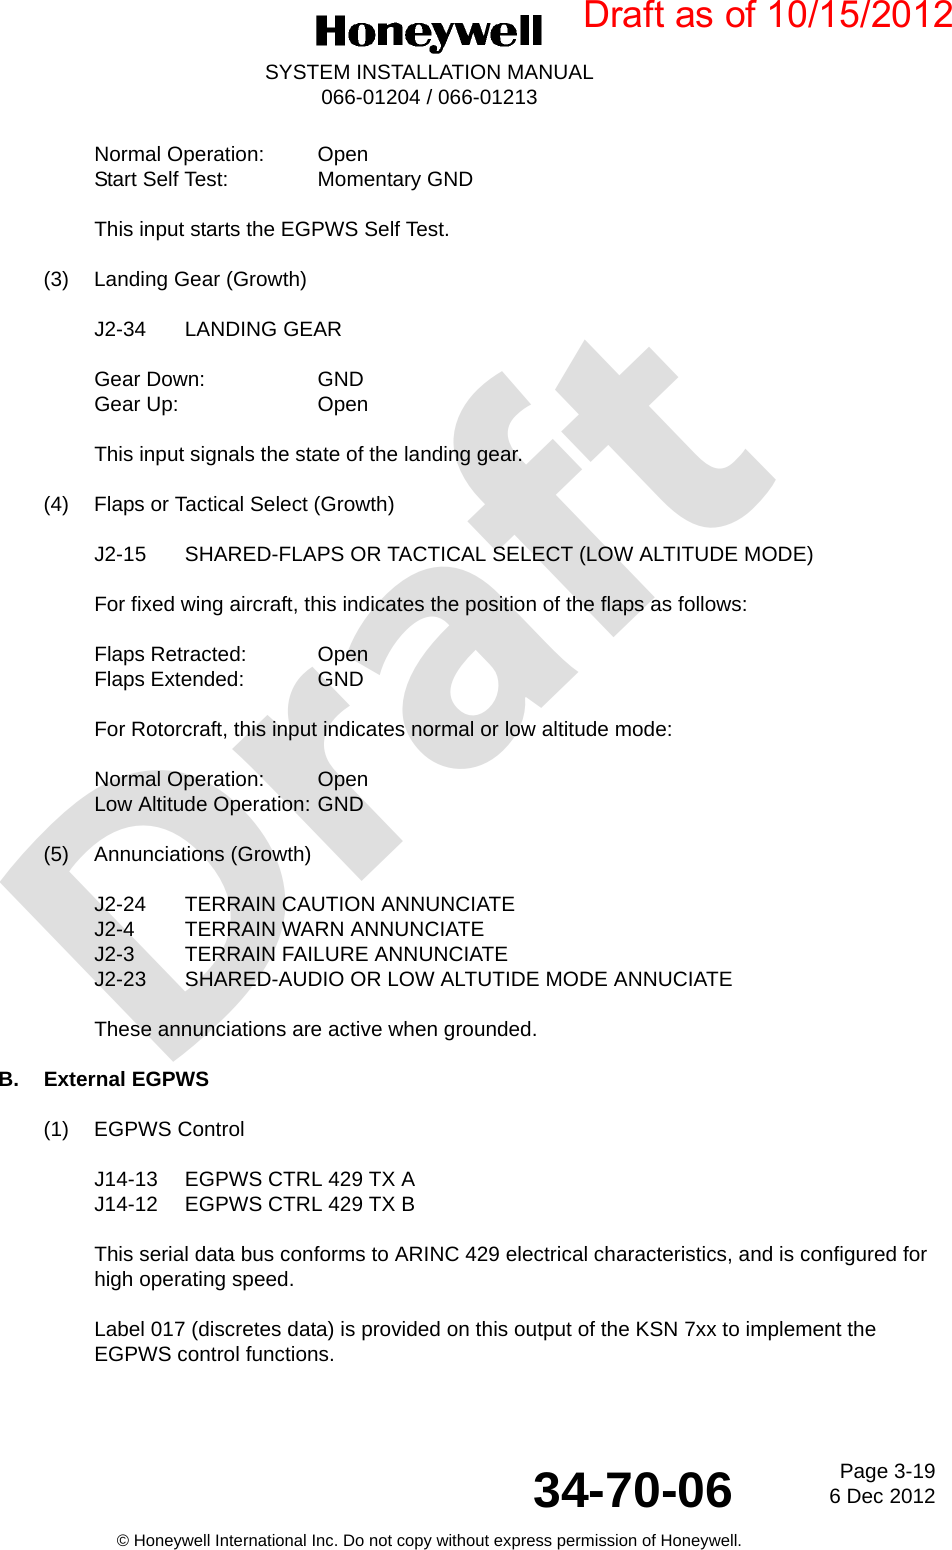 DraftPage 3-196 Dec 201234-70-06SYSTEM INSTALLATION MANUAL066-01204 / 066-01213© Honeywell International Inc. Do not copy without express permission of Honeywell.Normal Operation: OpenStart Self Test: Momentary GNDThis input starts the EGPWS Self Test.(3) Landing Gear (Growth)J2-34 LANDING GEARGear Down: GNDGear Up: OpenThis input signals the state of the landing gear.(4) Flaps or Tactical Select (Growth)J2-15 SHARED-FLAPS OR TACTICAL SELECT (LOW ALTITUDE MODE)For fixed wing aircraft, this indicates the position of the flaps as follows:Flaps Retracted:  OpenFlaps Extended:  GNDFor Rotorcraft, this input indicates normal or low altitude mode:Normal Operation:  OpenLow Altitude Operation: GND(5) Annunciations (Growth)J2-24 TERRAIN CAUTION ANNUNCIATEJ2-4 TERRAIN WARN ANNUNCIATEJ2-3 TERRAIN FAILURE ANNUNCIATEJ2-23 SHARED-AUDIO OR LOW ALTUTIDE MODE ANNUCIATEThese annunciations are active when grounded.B. External EGPWS(1) EGPWS ControlJ14-13 EGPWS CTRL 429 TX AJ14-12 EGPWS CTRL 429 TX BThis serial data bus conforms to ARINC 429 electrical characteristics, and is configured for high operating speed.Label 017 (discretes data) is provided on this output of the KSN 7xx to implement the EGPWS control functions.Draft as of 10/15/2012